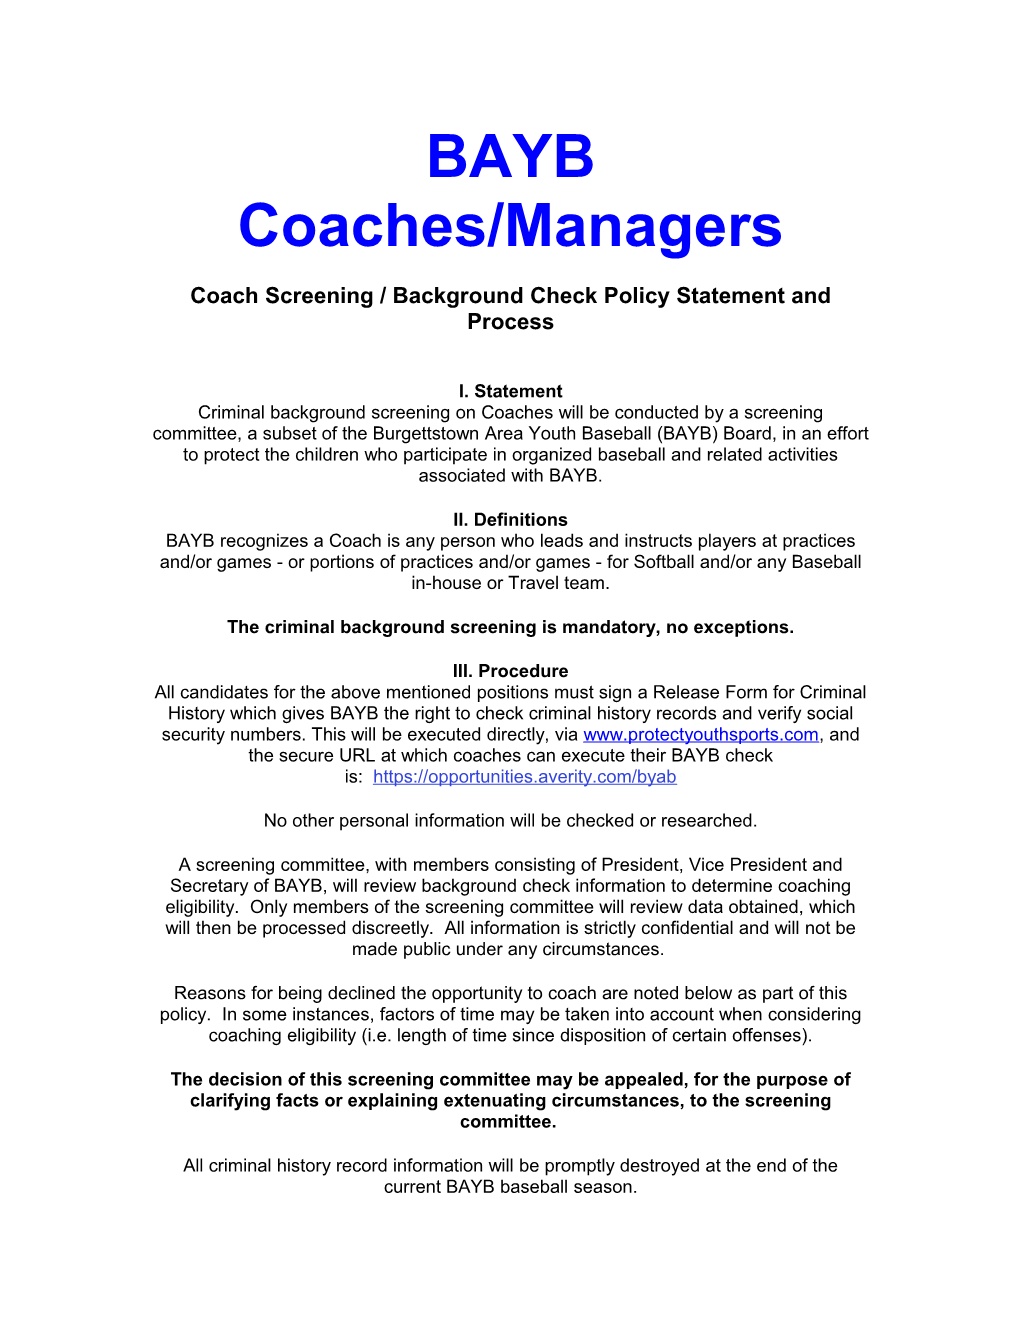 BAYB Coaches/Managers